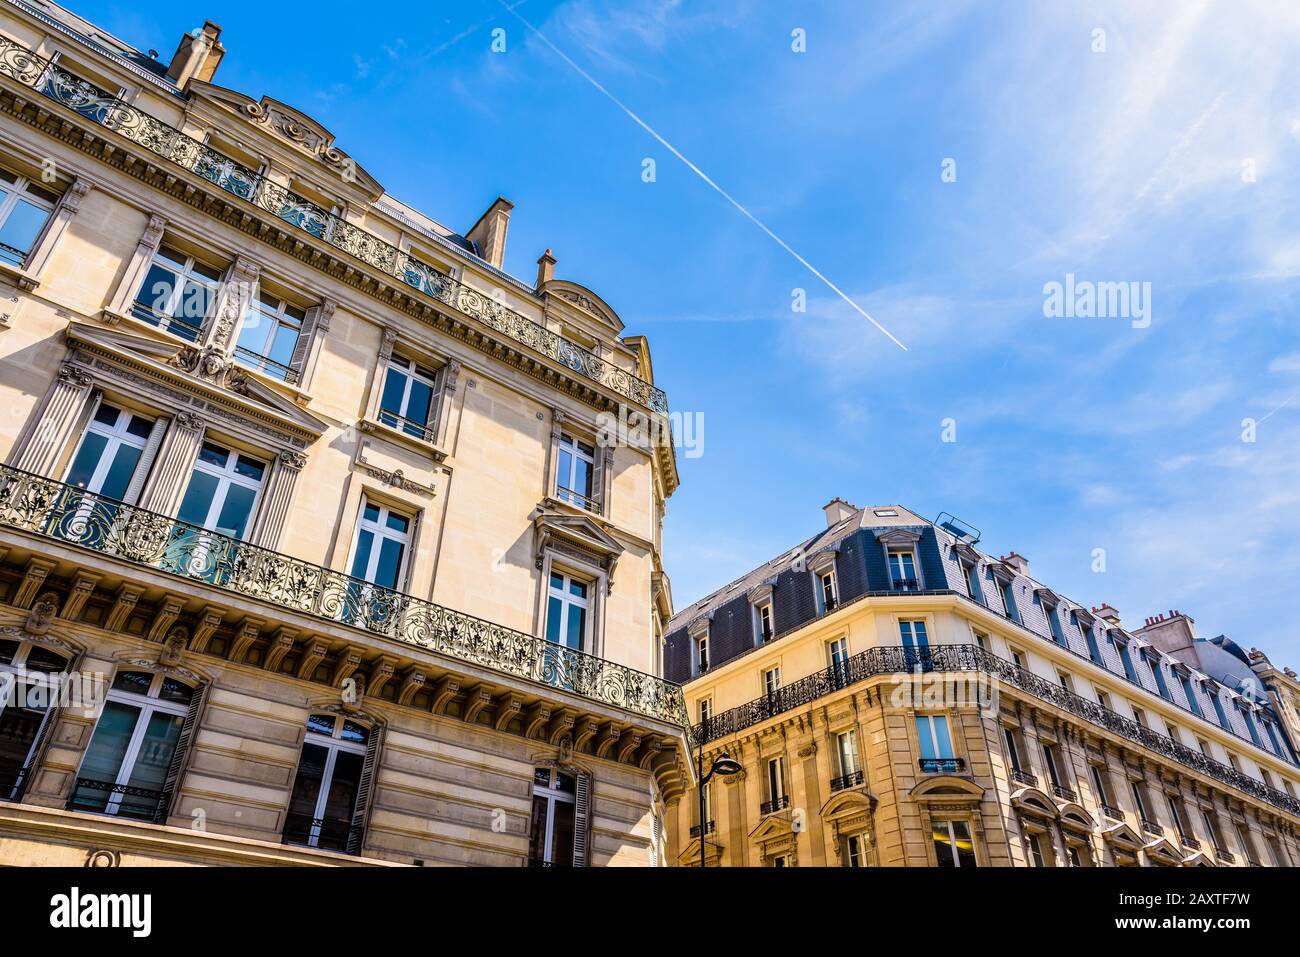 Low angle view of typical Haussmannian style residential buildings in the chic neighborhoods of Paris, France, on a sunny day against blue sky. Stock Photo